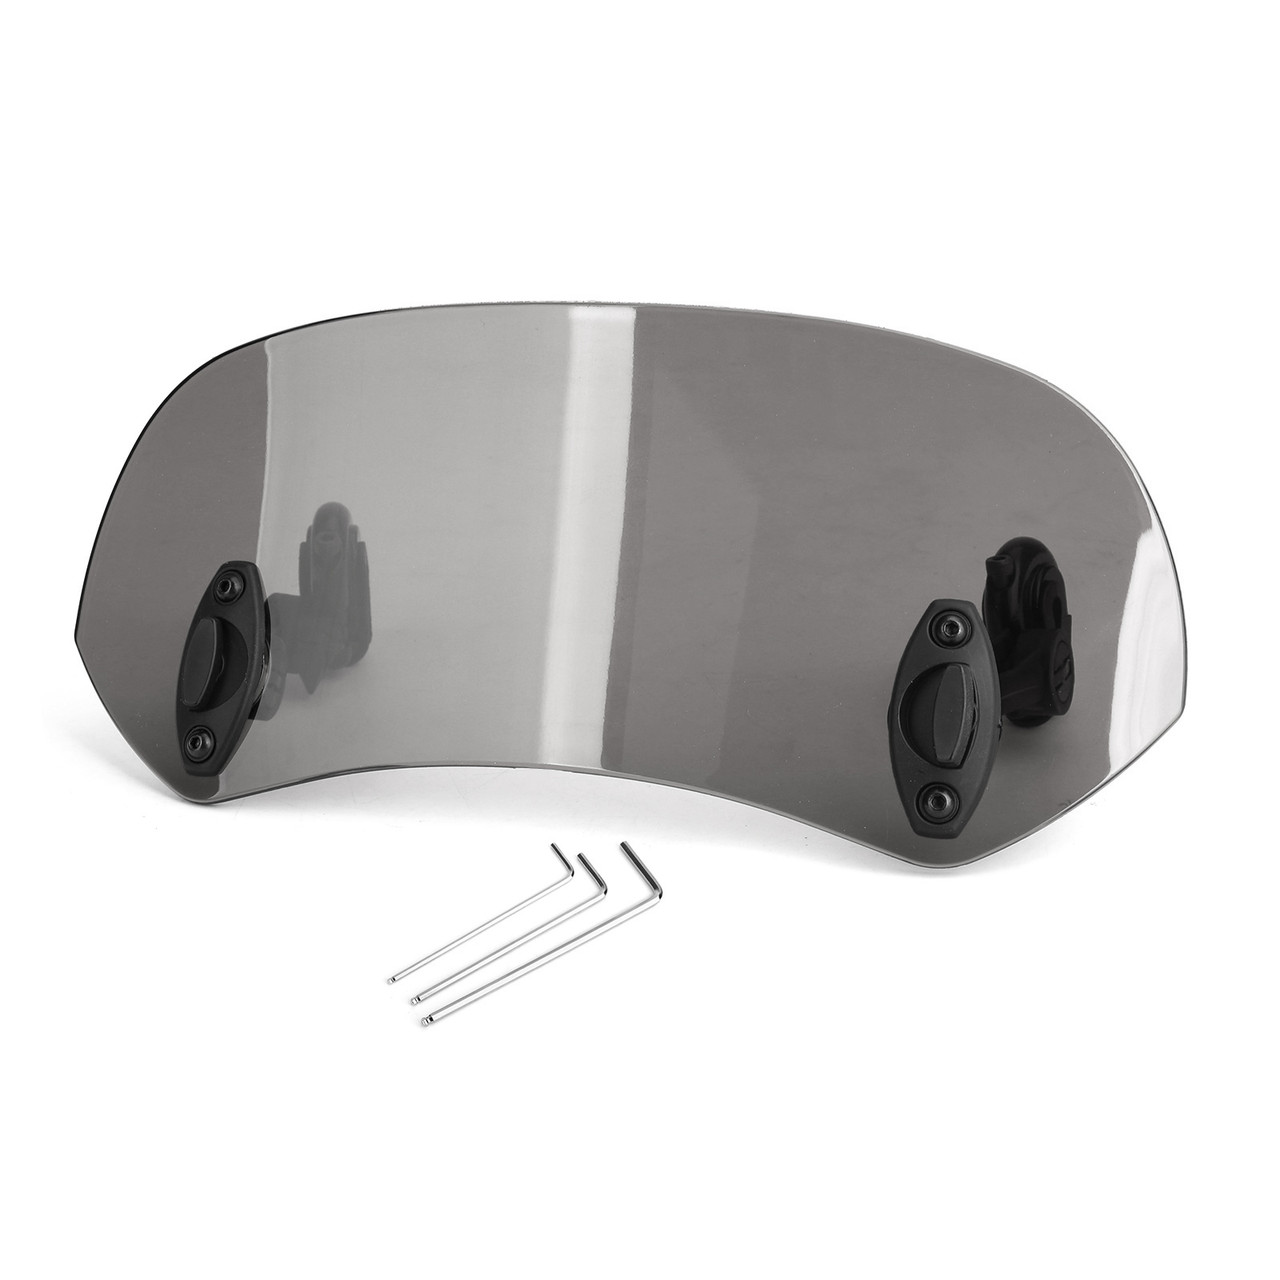 ABS Plastic Windshield Windscreen Universal Fit For Most of Motorcycle Gray